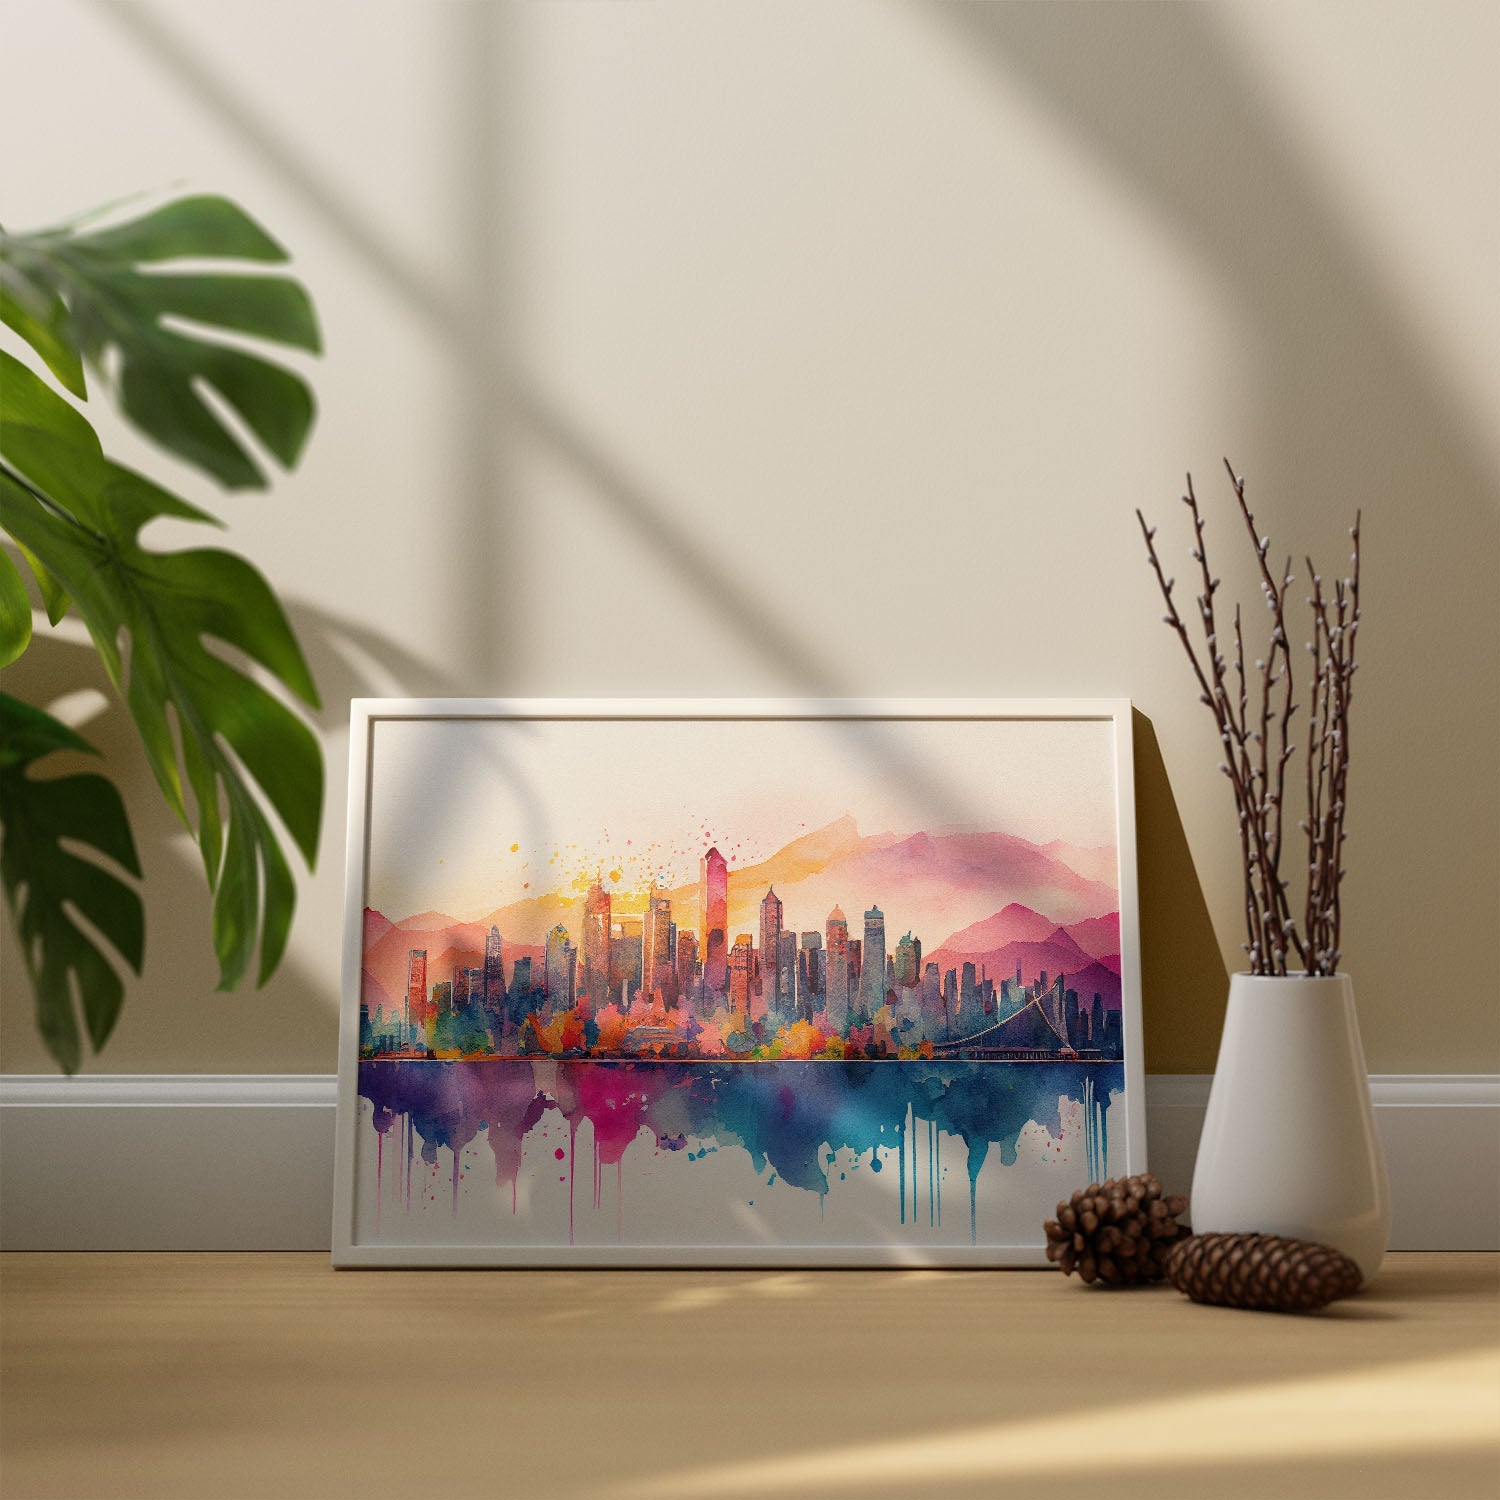 Nacnic watercolor of a skyline of the city of Vancouver. Aesthetic Wall Art Prints for Bedroom or Living Room Design.-Artwork-Nacnic-A4-Sin Marco-Nacnic Estudio SL